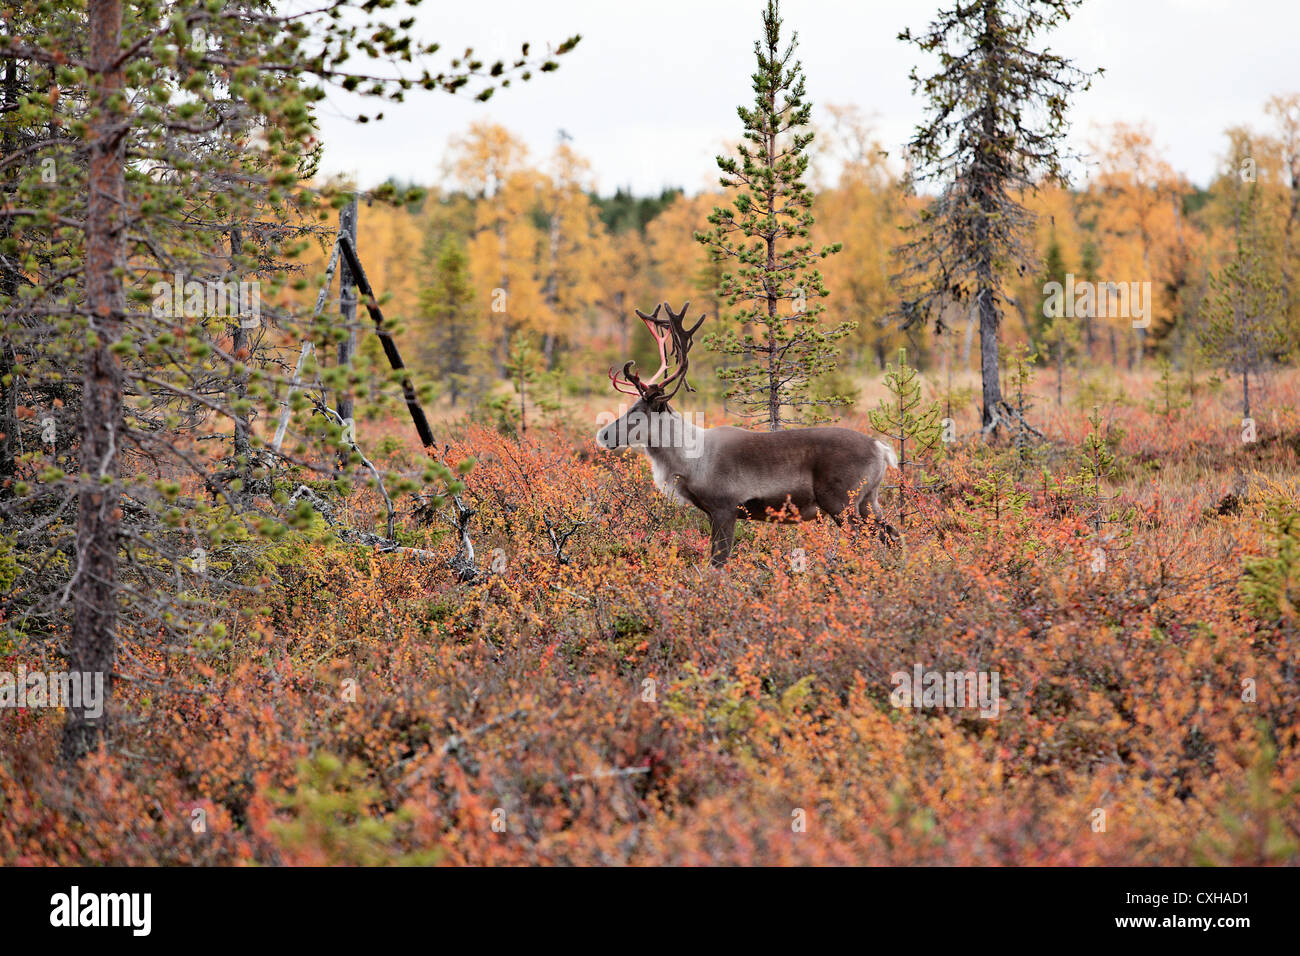 Reindeer surrounded by autumn colors. Lapland, Finland Stock Photo